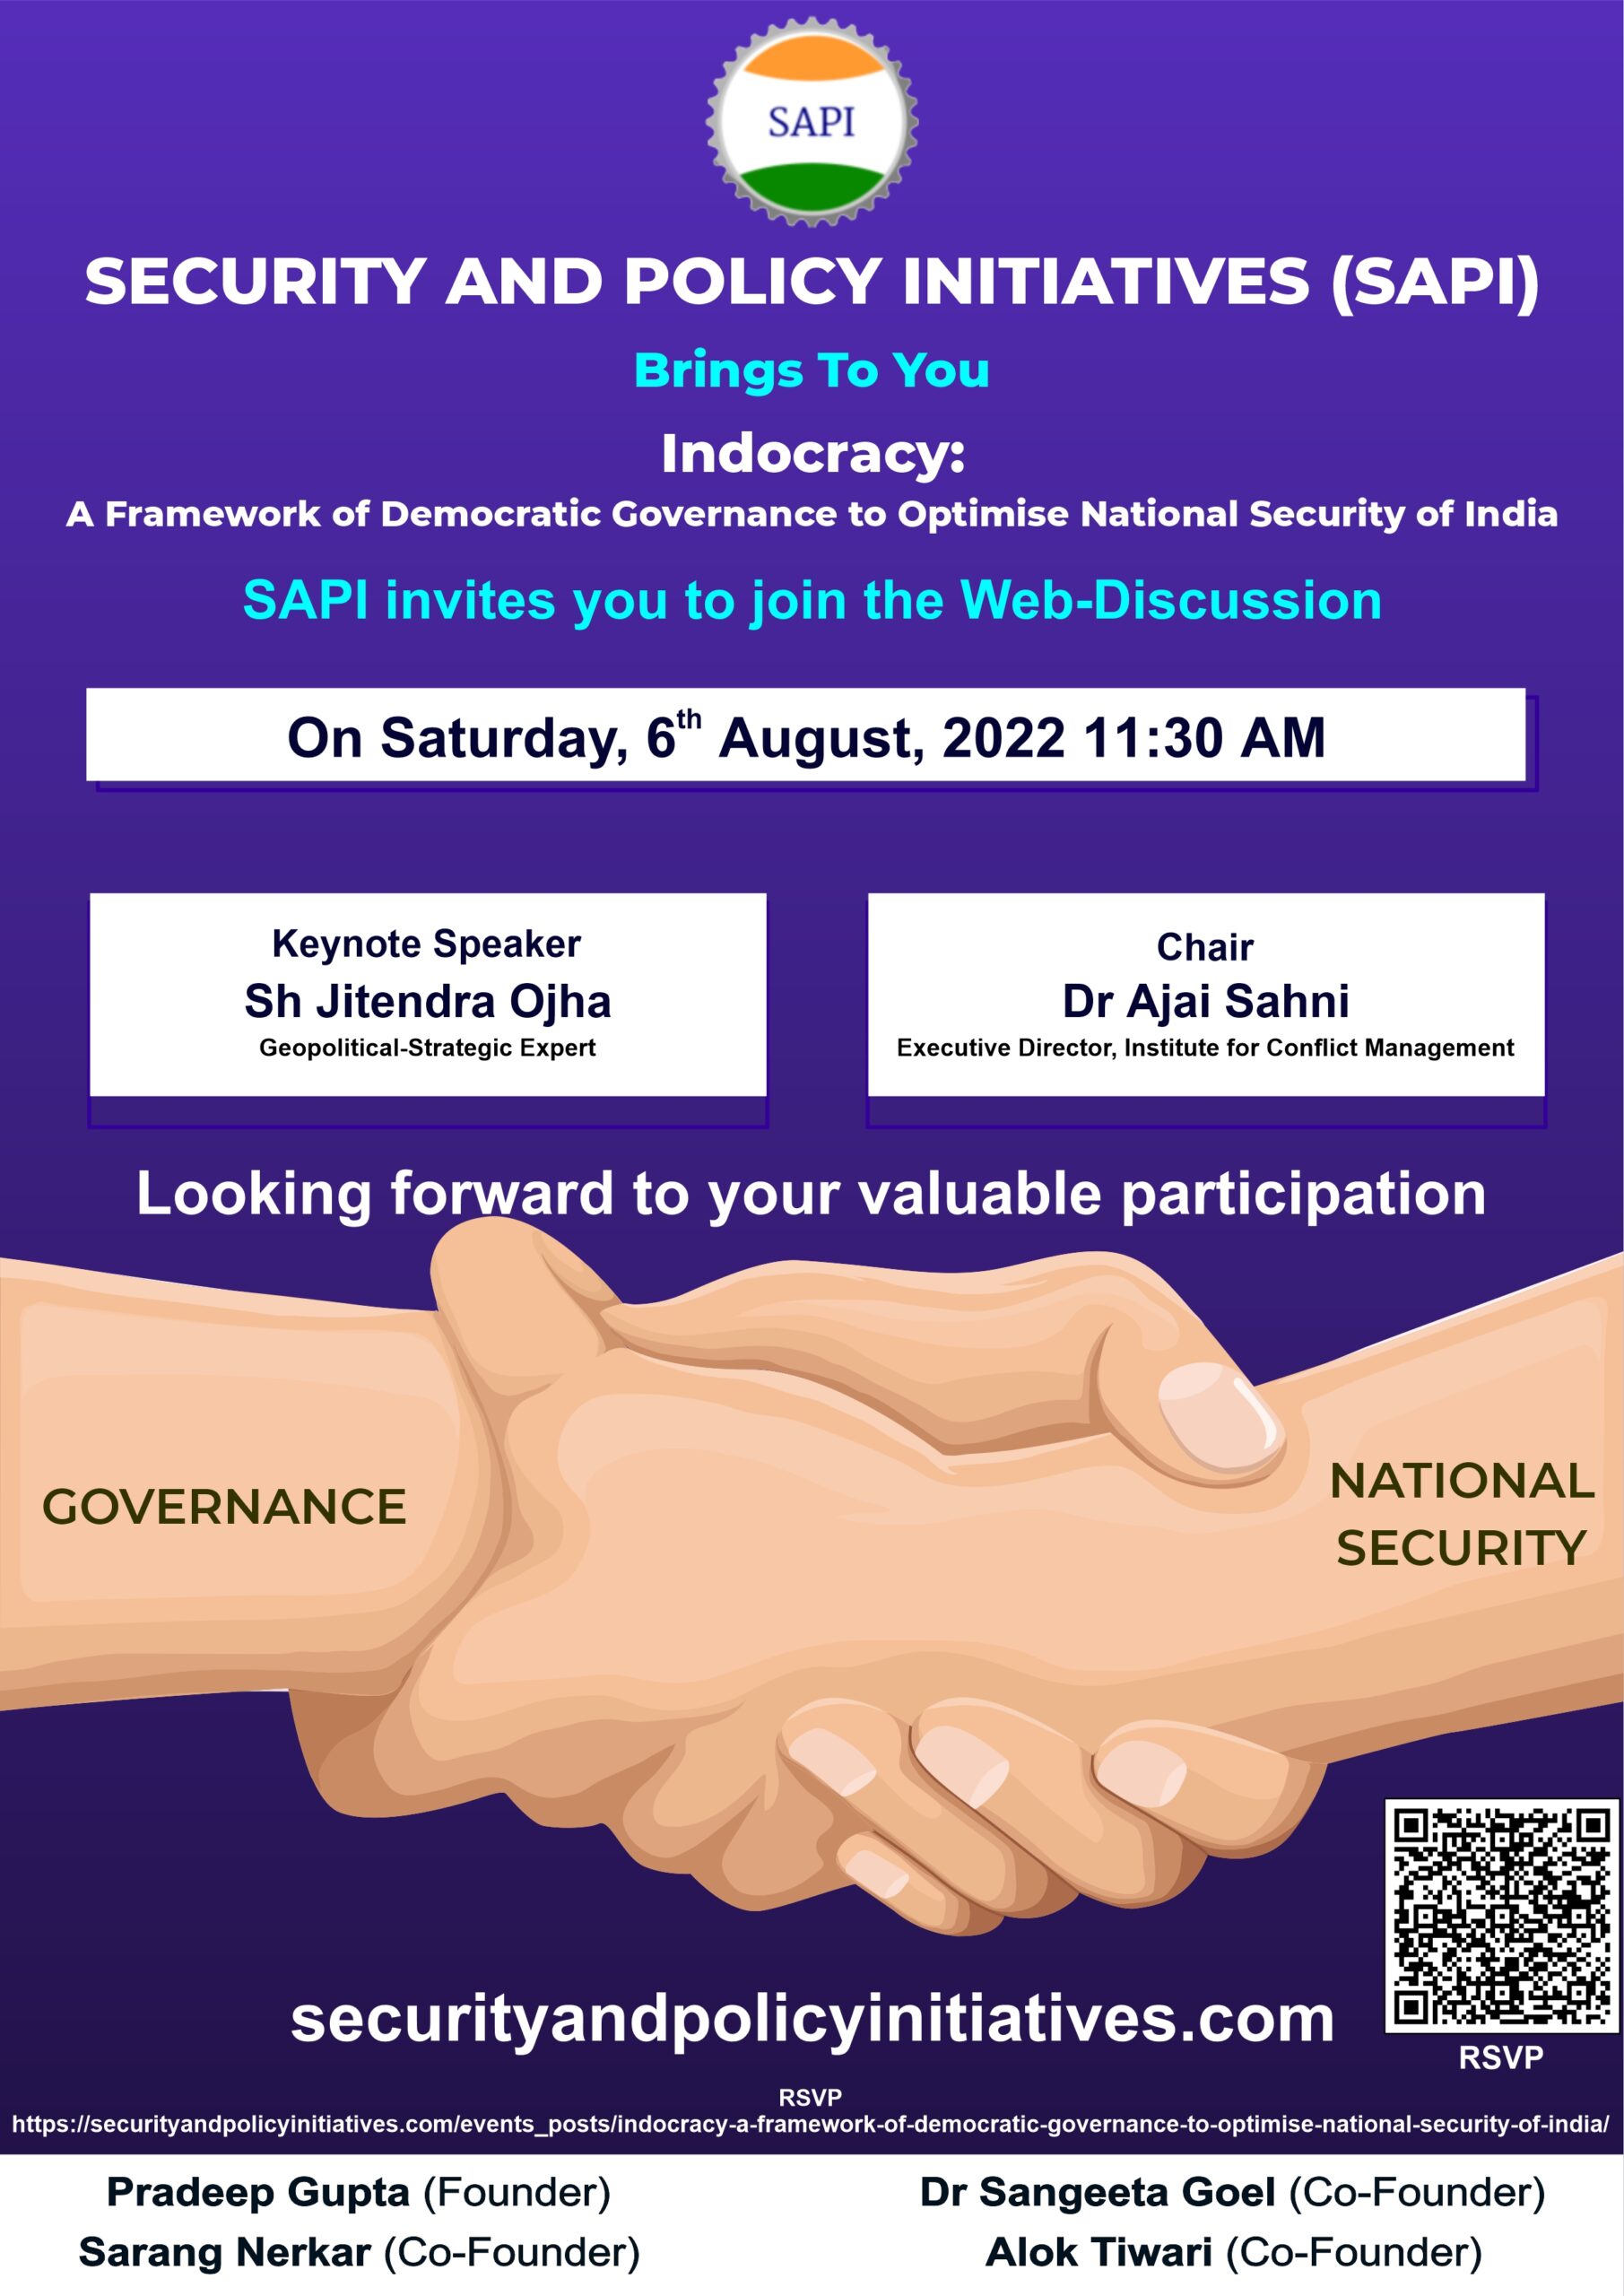 Indocracy: A Framework of Democratic Governance to Optimise National Security of India